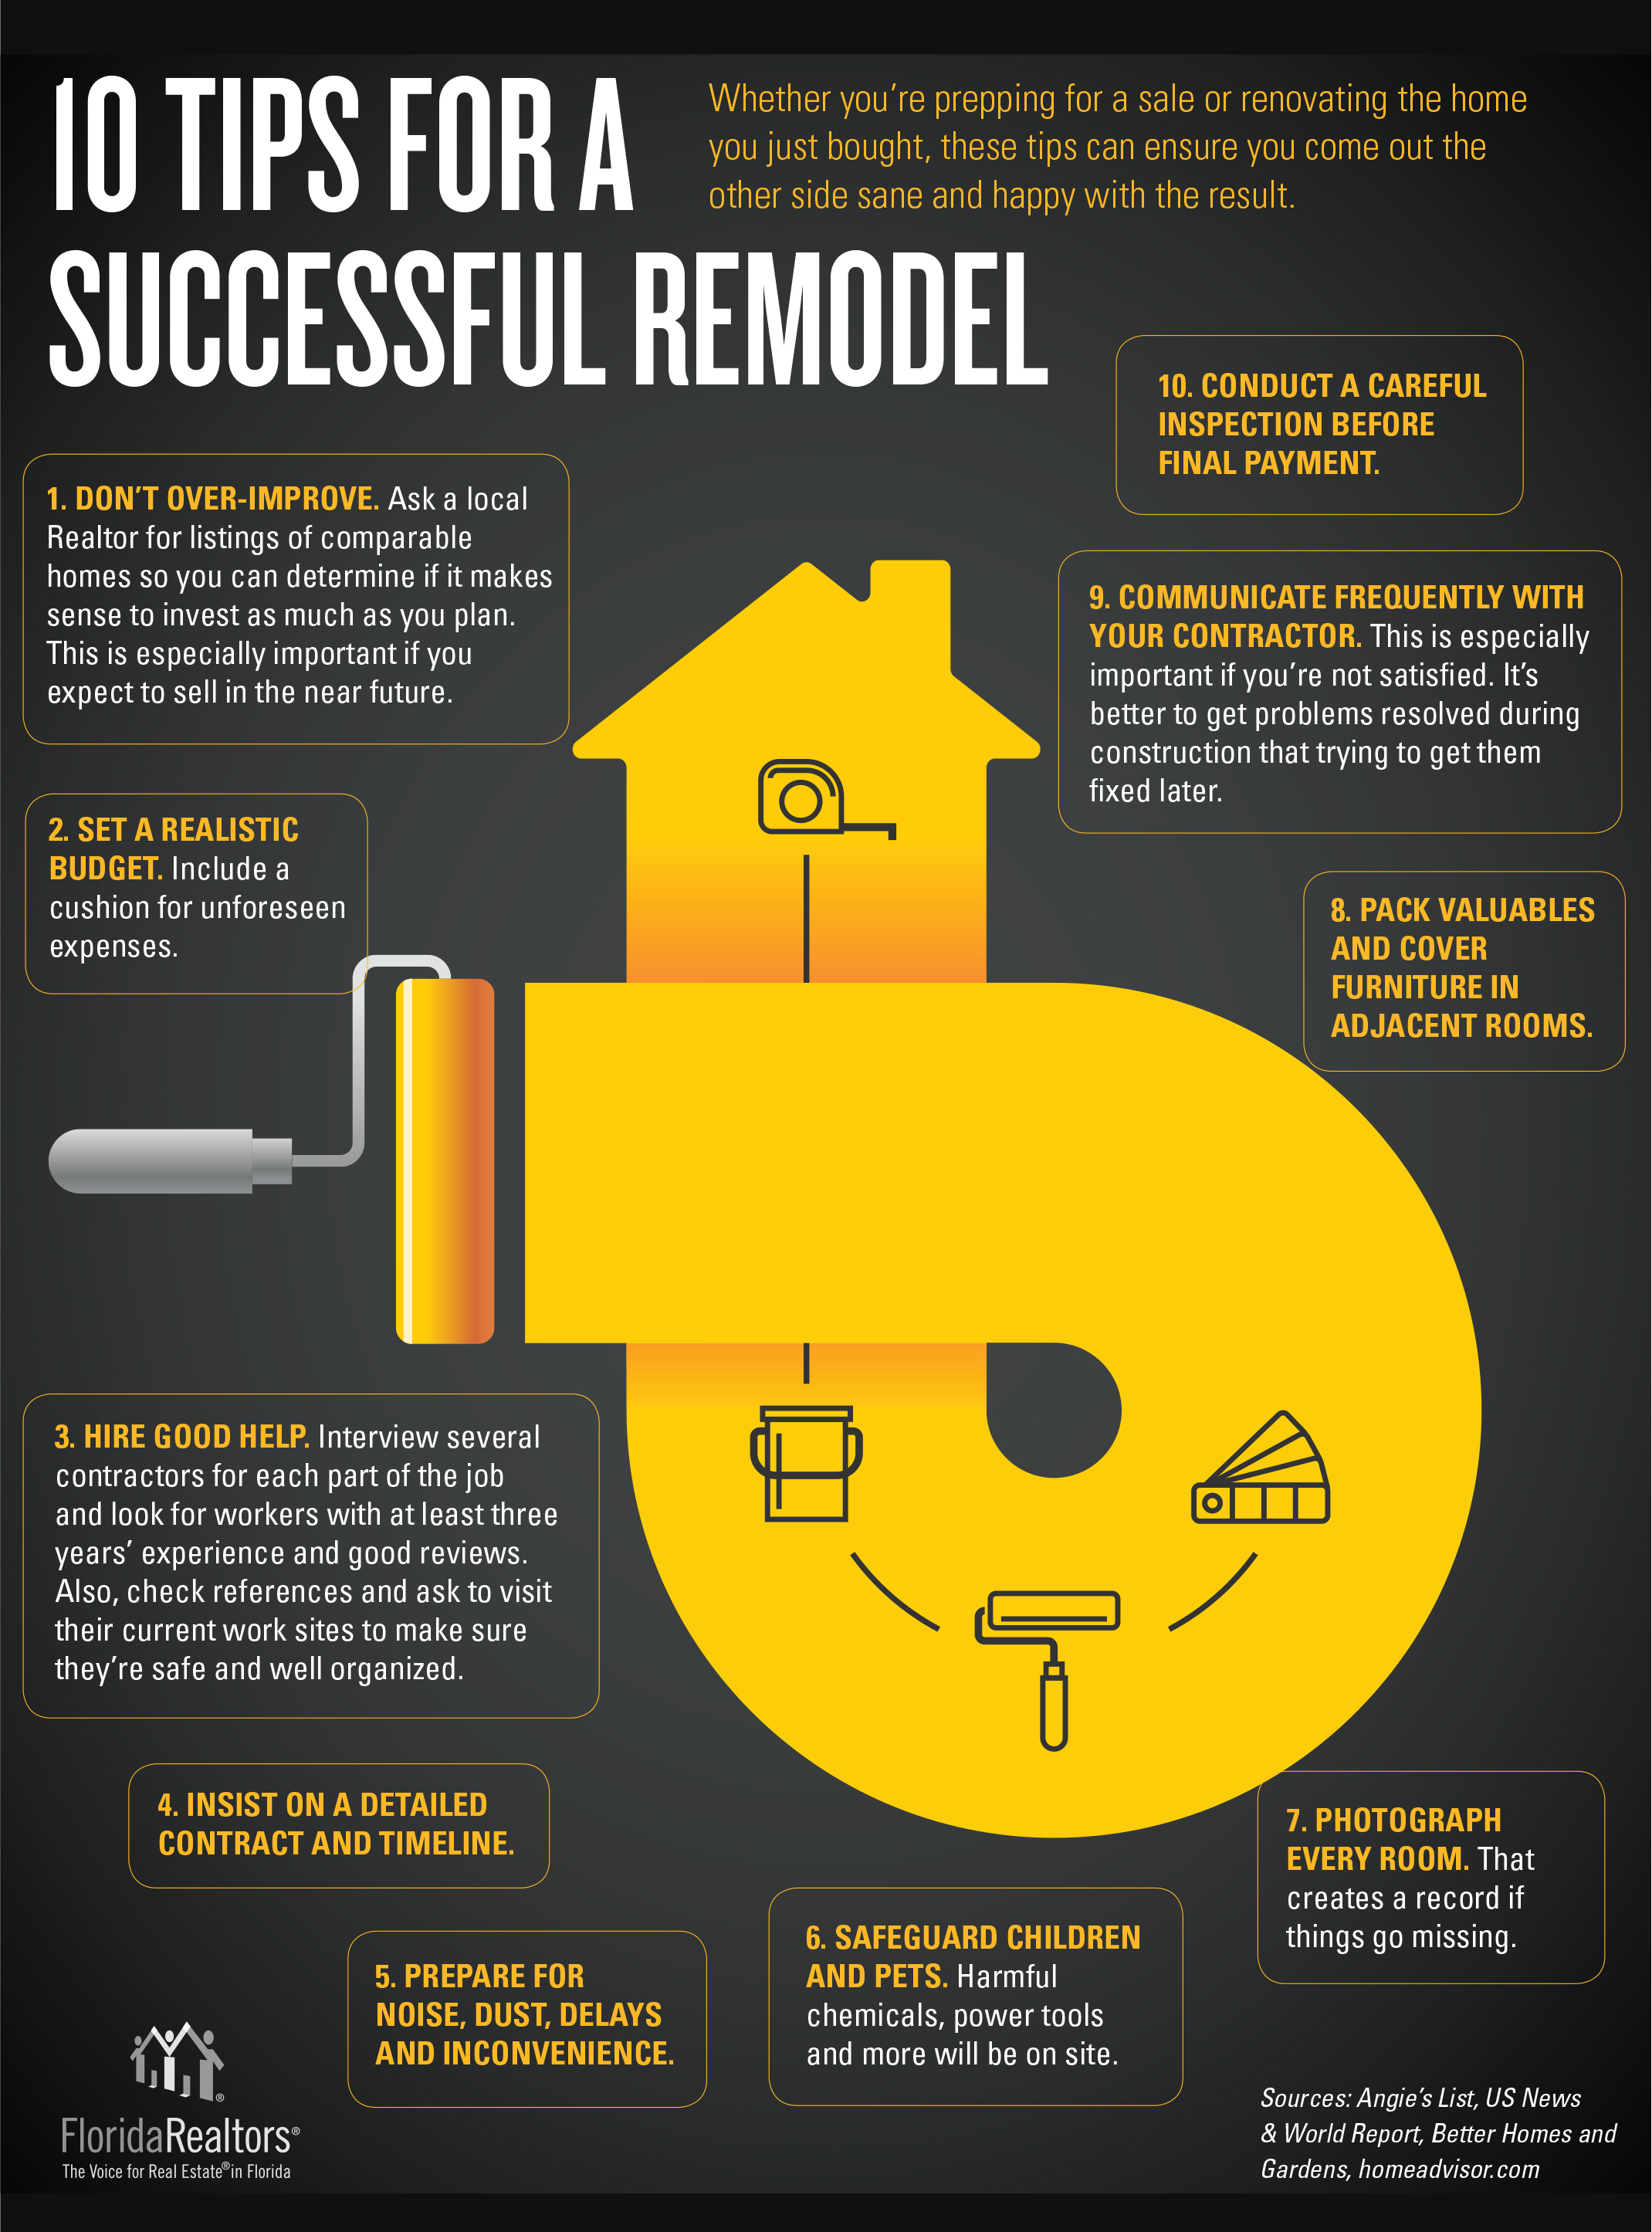 Why use a realtor? 4 ways it pays [INFOGRAPHIC]